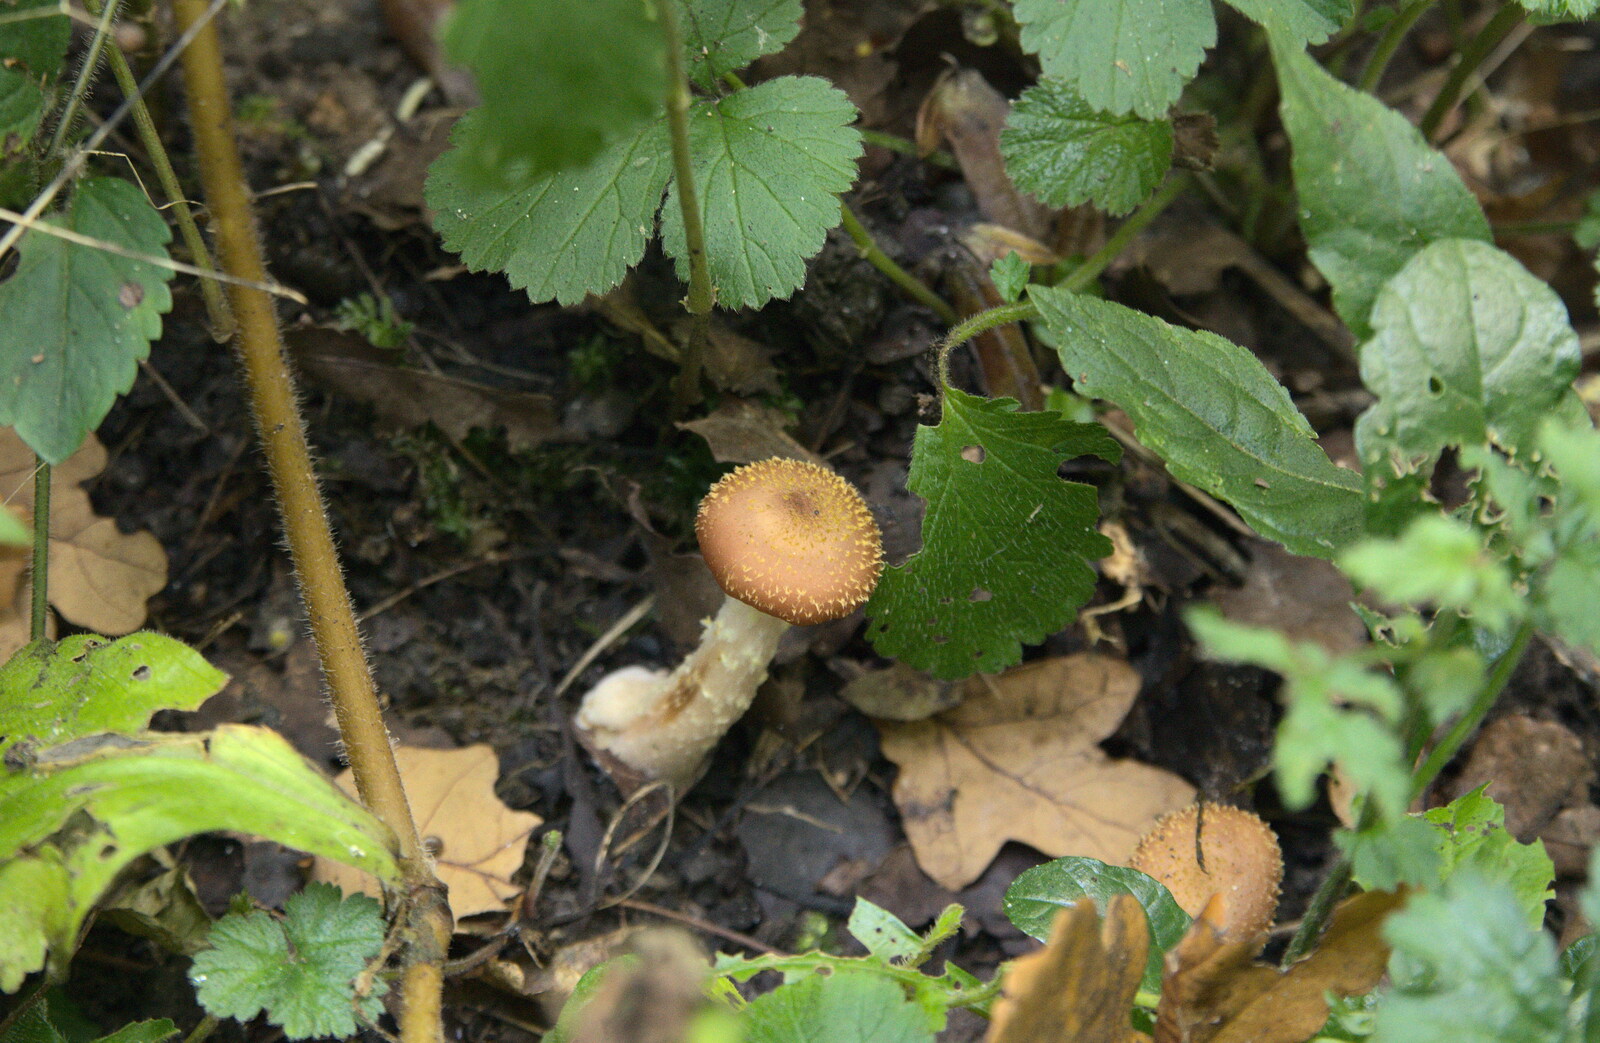 Another fruiting body thrusts upwards from The Mushrooms of Thornham Estate, Thornham, Suffolk - 4th October 2015